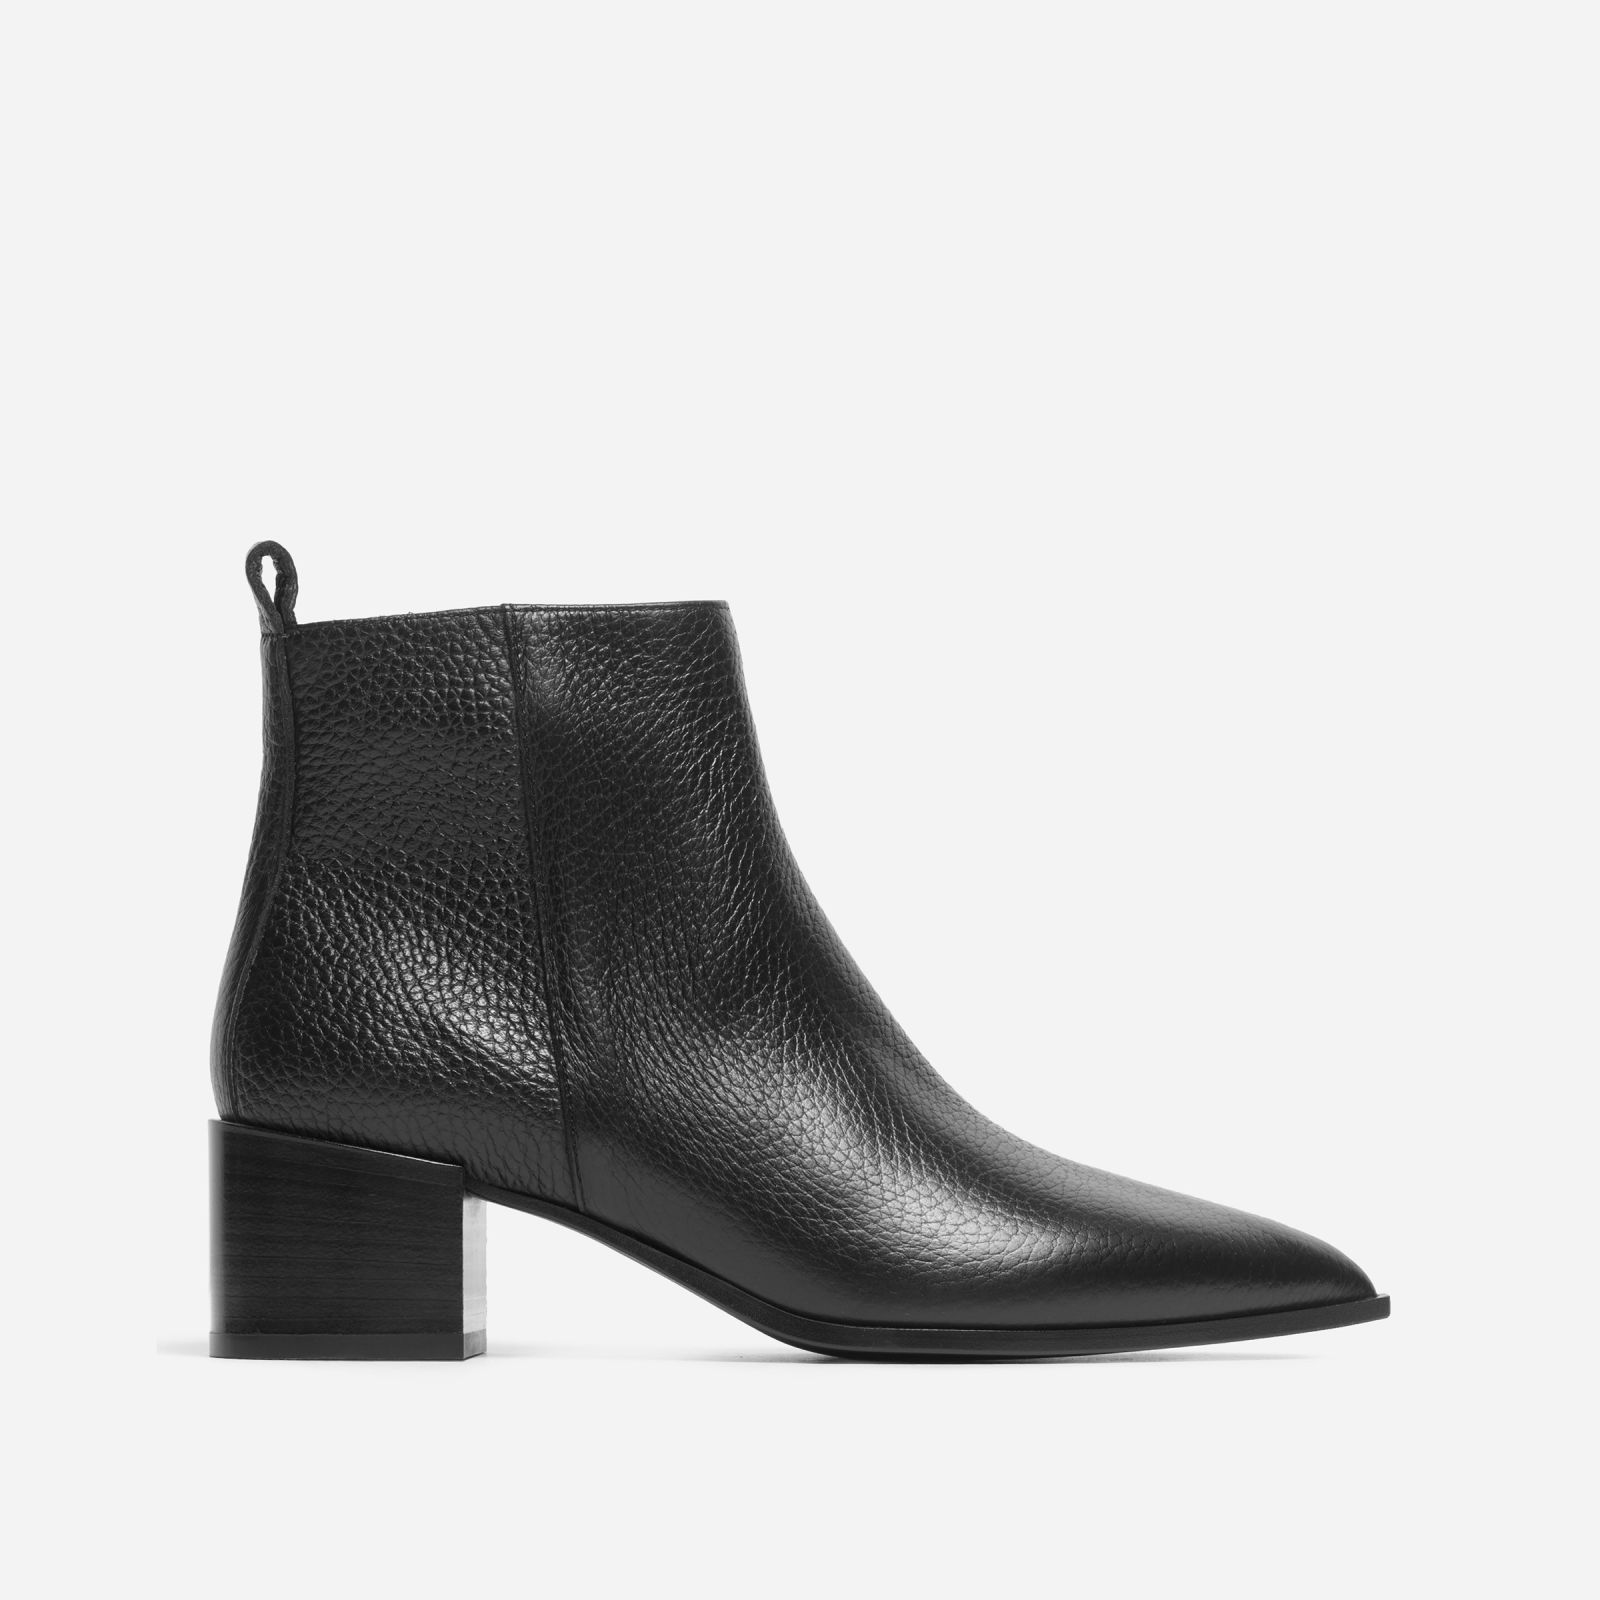 Women's Pointy Boot by Everlane in Black Pebbled, Size 10 | Everlane